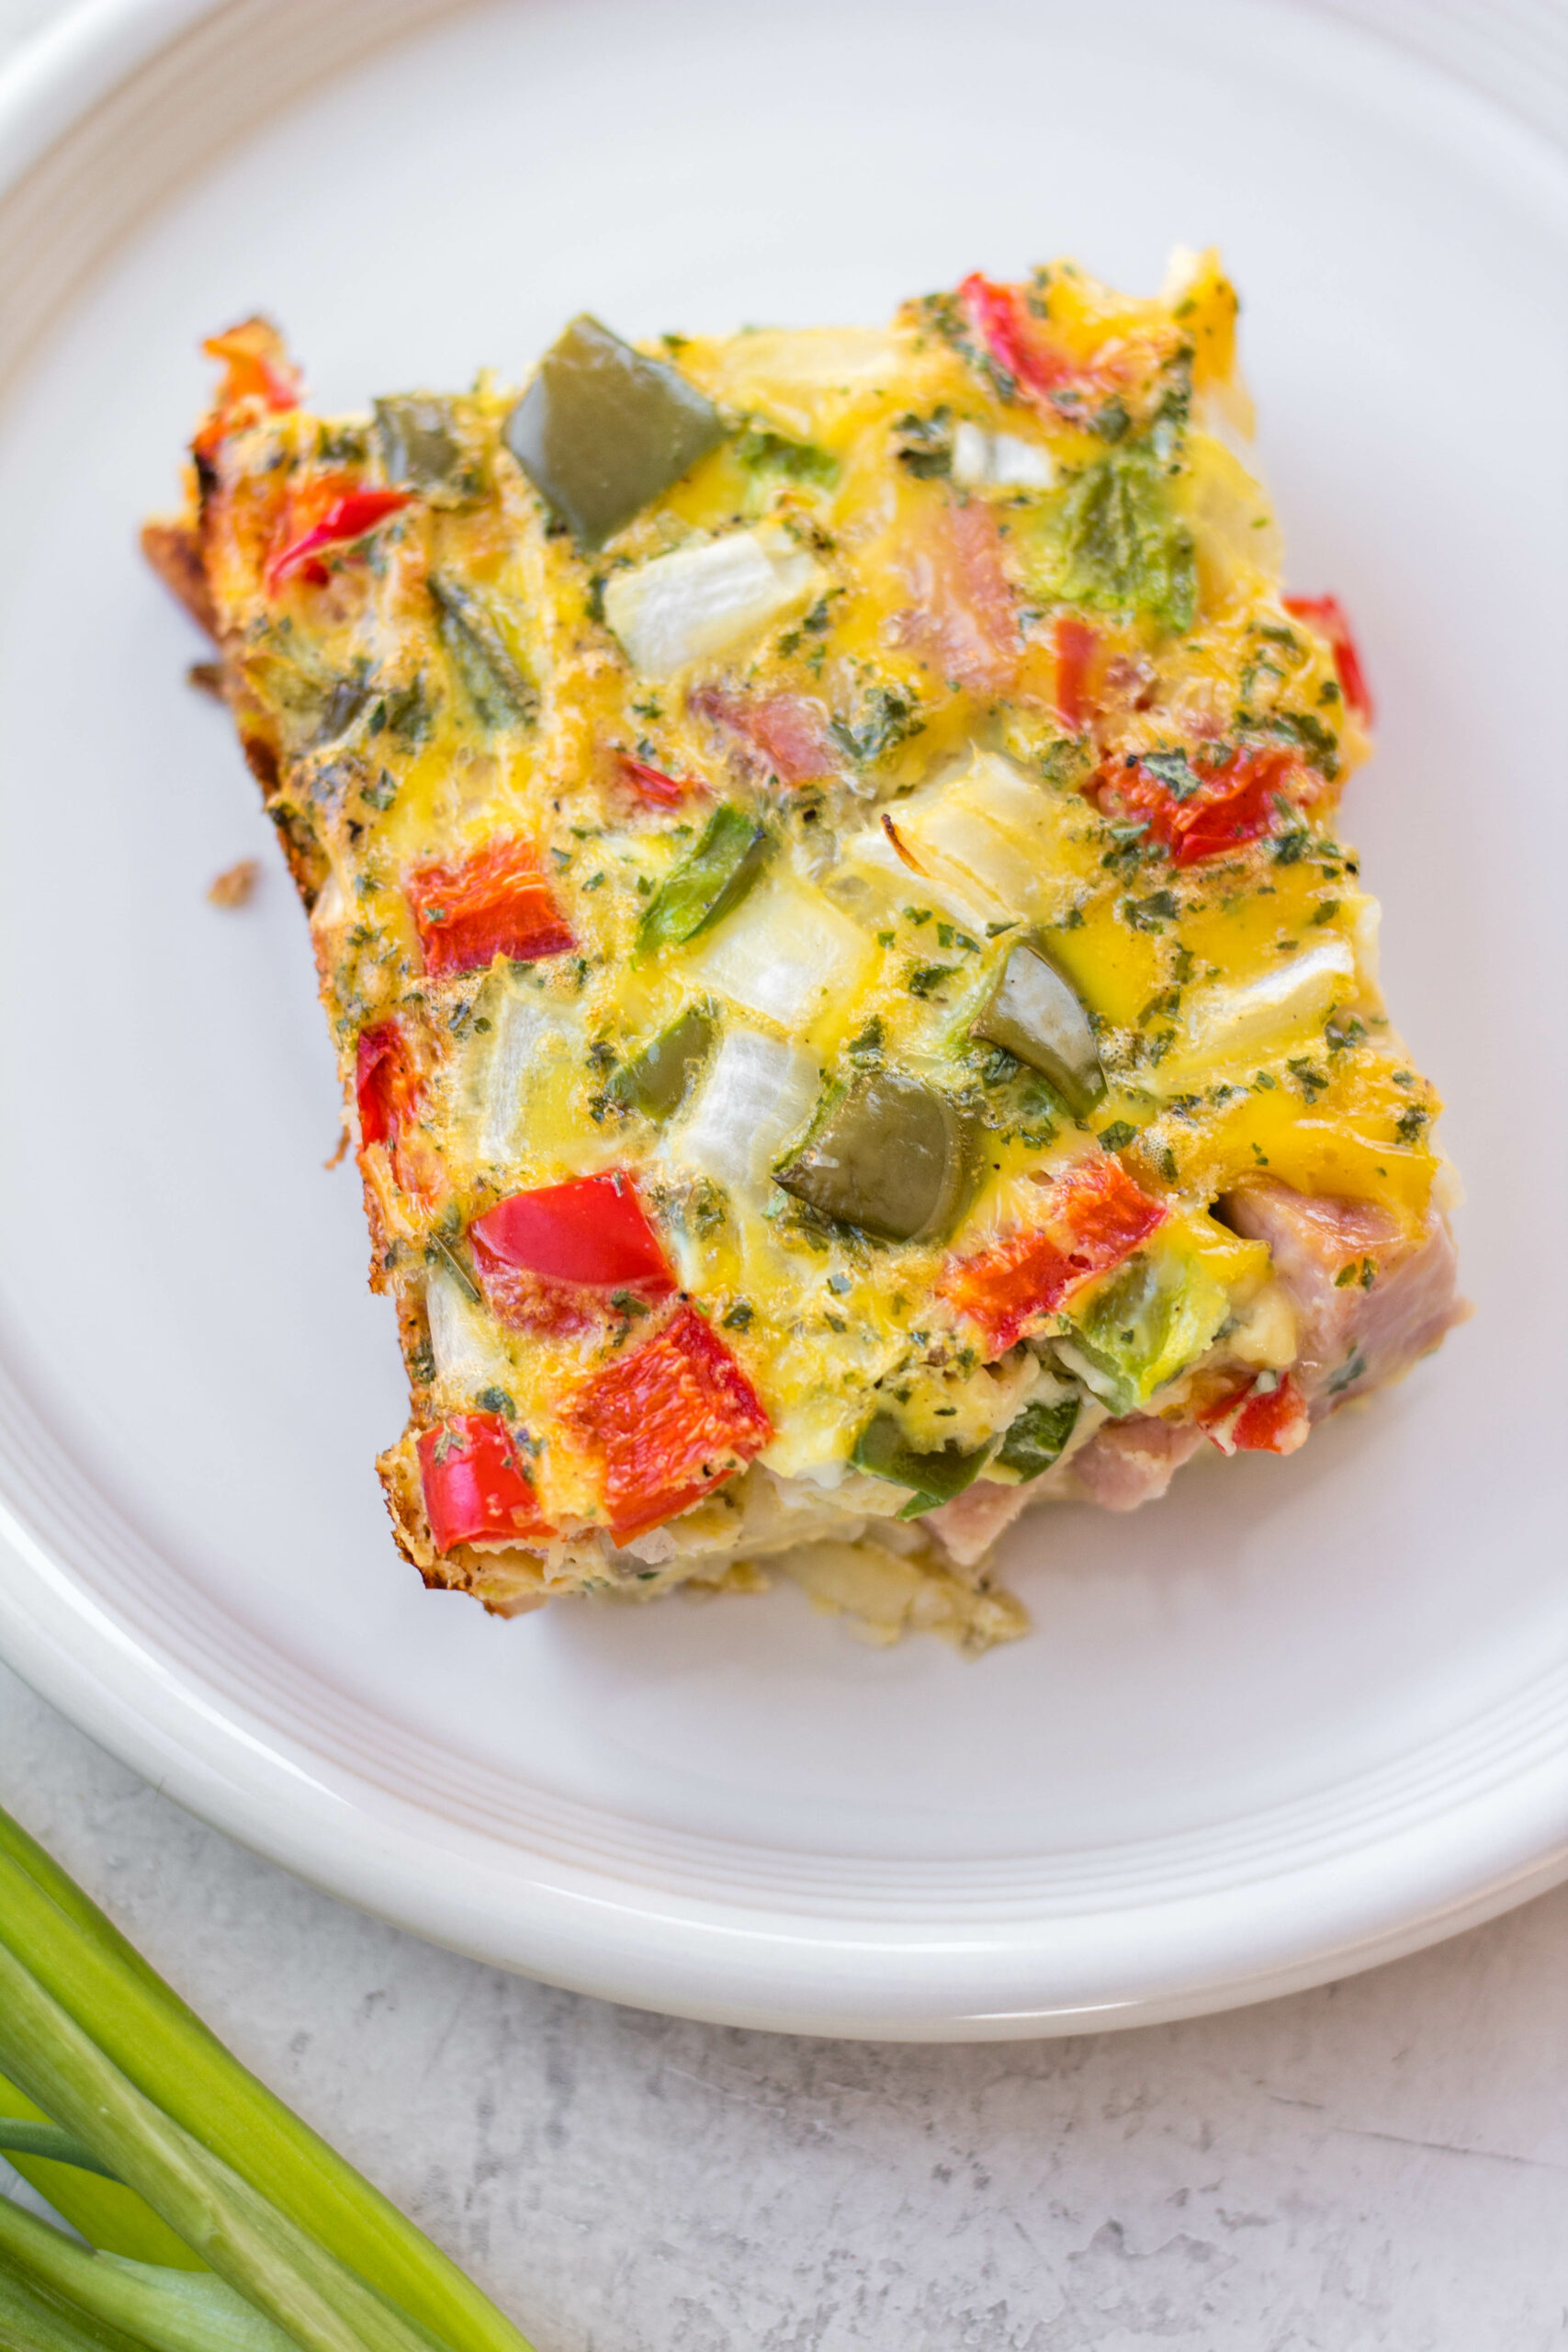 A ham egg bake is the perfect use for any leftover ham you might have on hand. It makes enough to feed a gathering or for an easy breakfast prep for the days ahead. This recipe is gluten free and is simple to make with easy ingredients. The ham and peppers flavors are a classic the everyone loves and can be customized to make it perfect for your crew. #leftoverhamrecipes #hamrecipes #eggbake #healthybreakfastrecipes #hamandpeppers